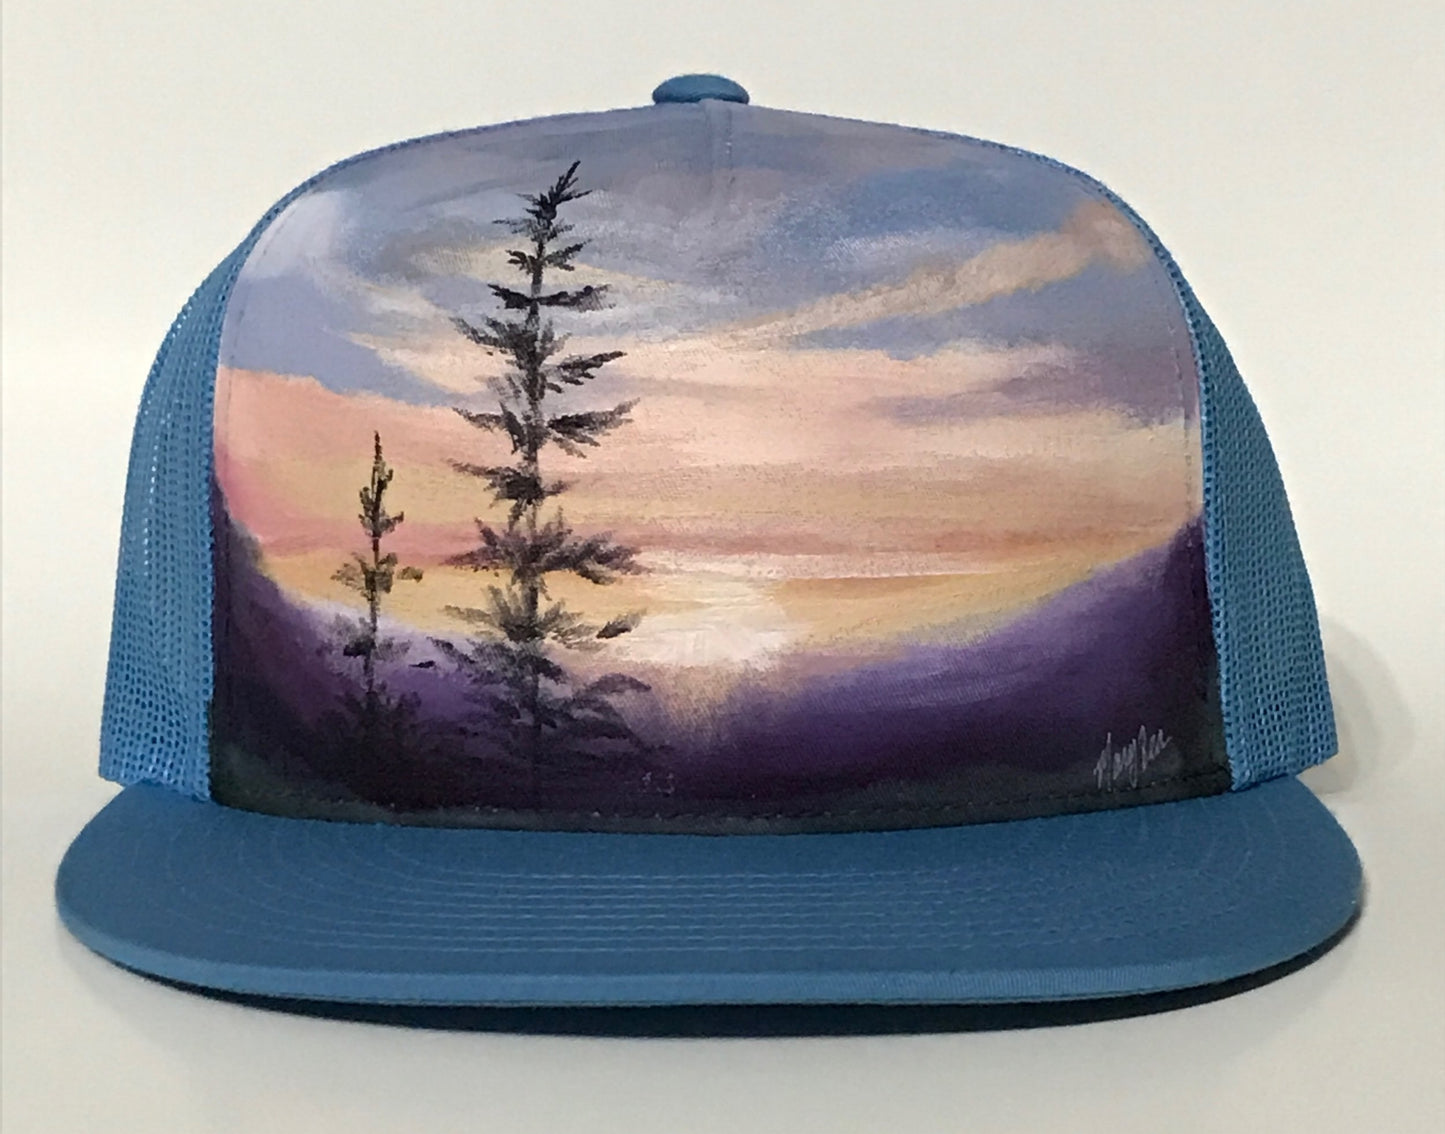 "Pine Sunset" Hand Painted on Baby Blue Snapback Trucker Hat